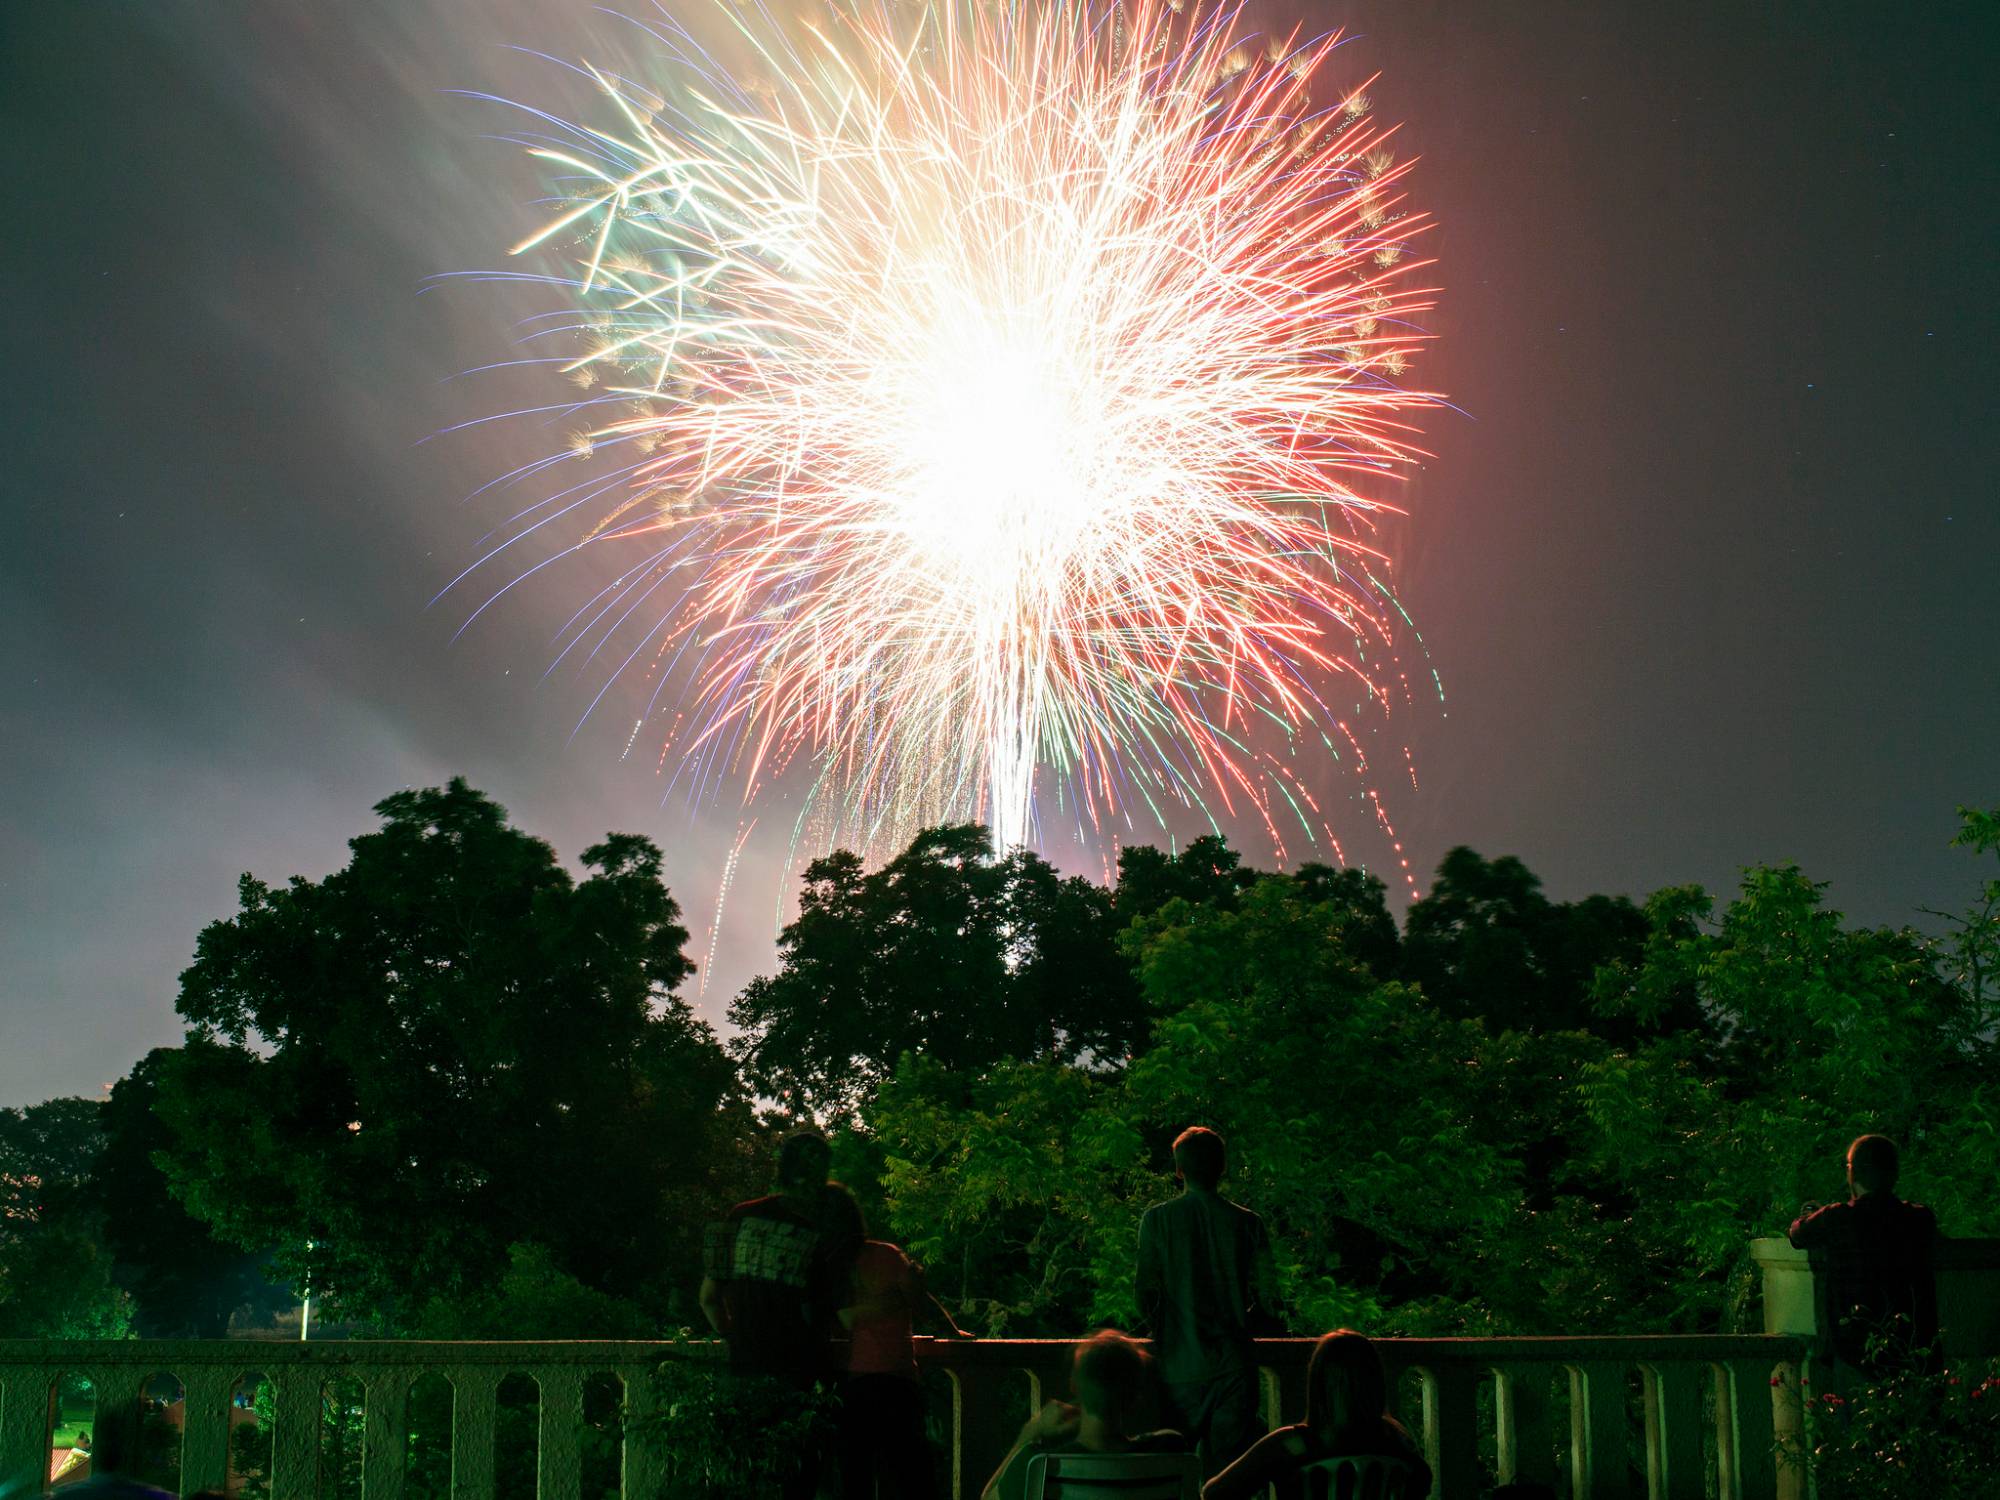 Visitors can view 4th of July fireworks from the top deck of The Meadows Center.